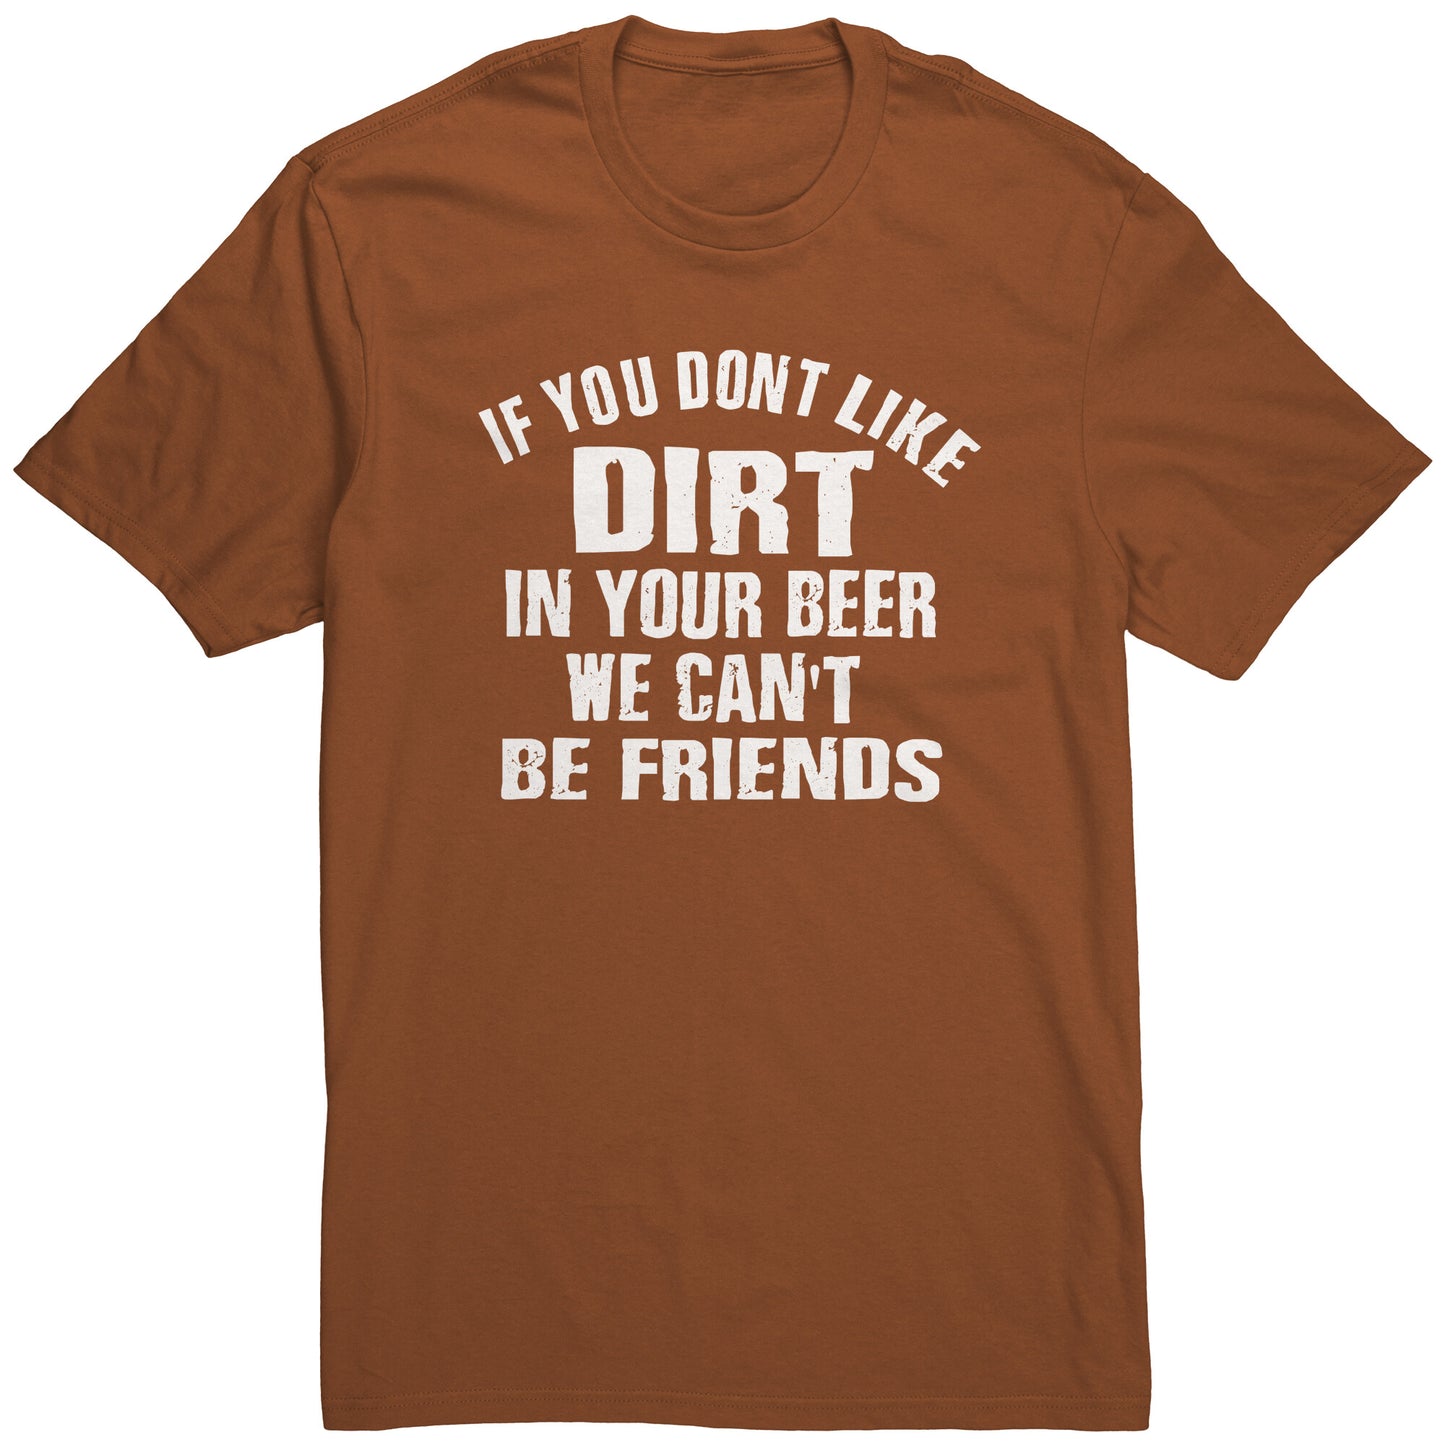 IF YOU DON'T LIKE DIRT IN YOUR BEER WE CAN'T BE FRIENDS MEN'S T-SHIRT